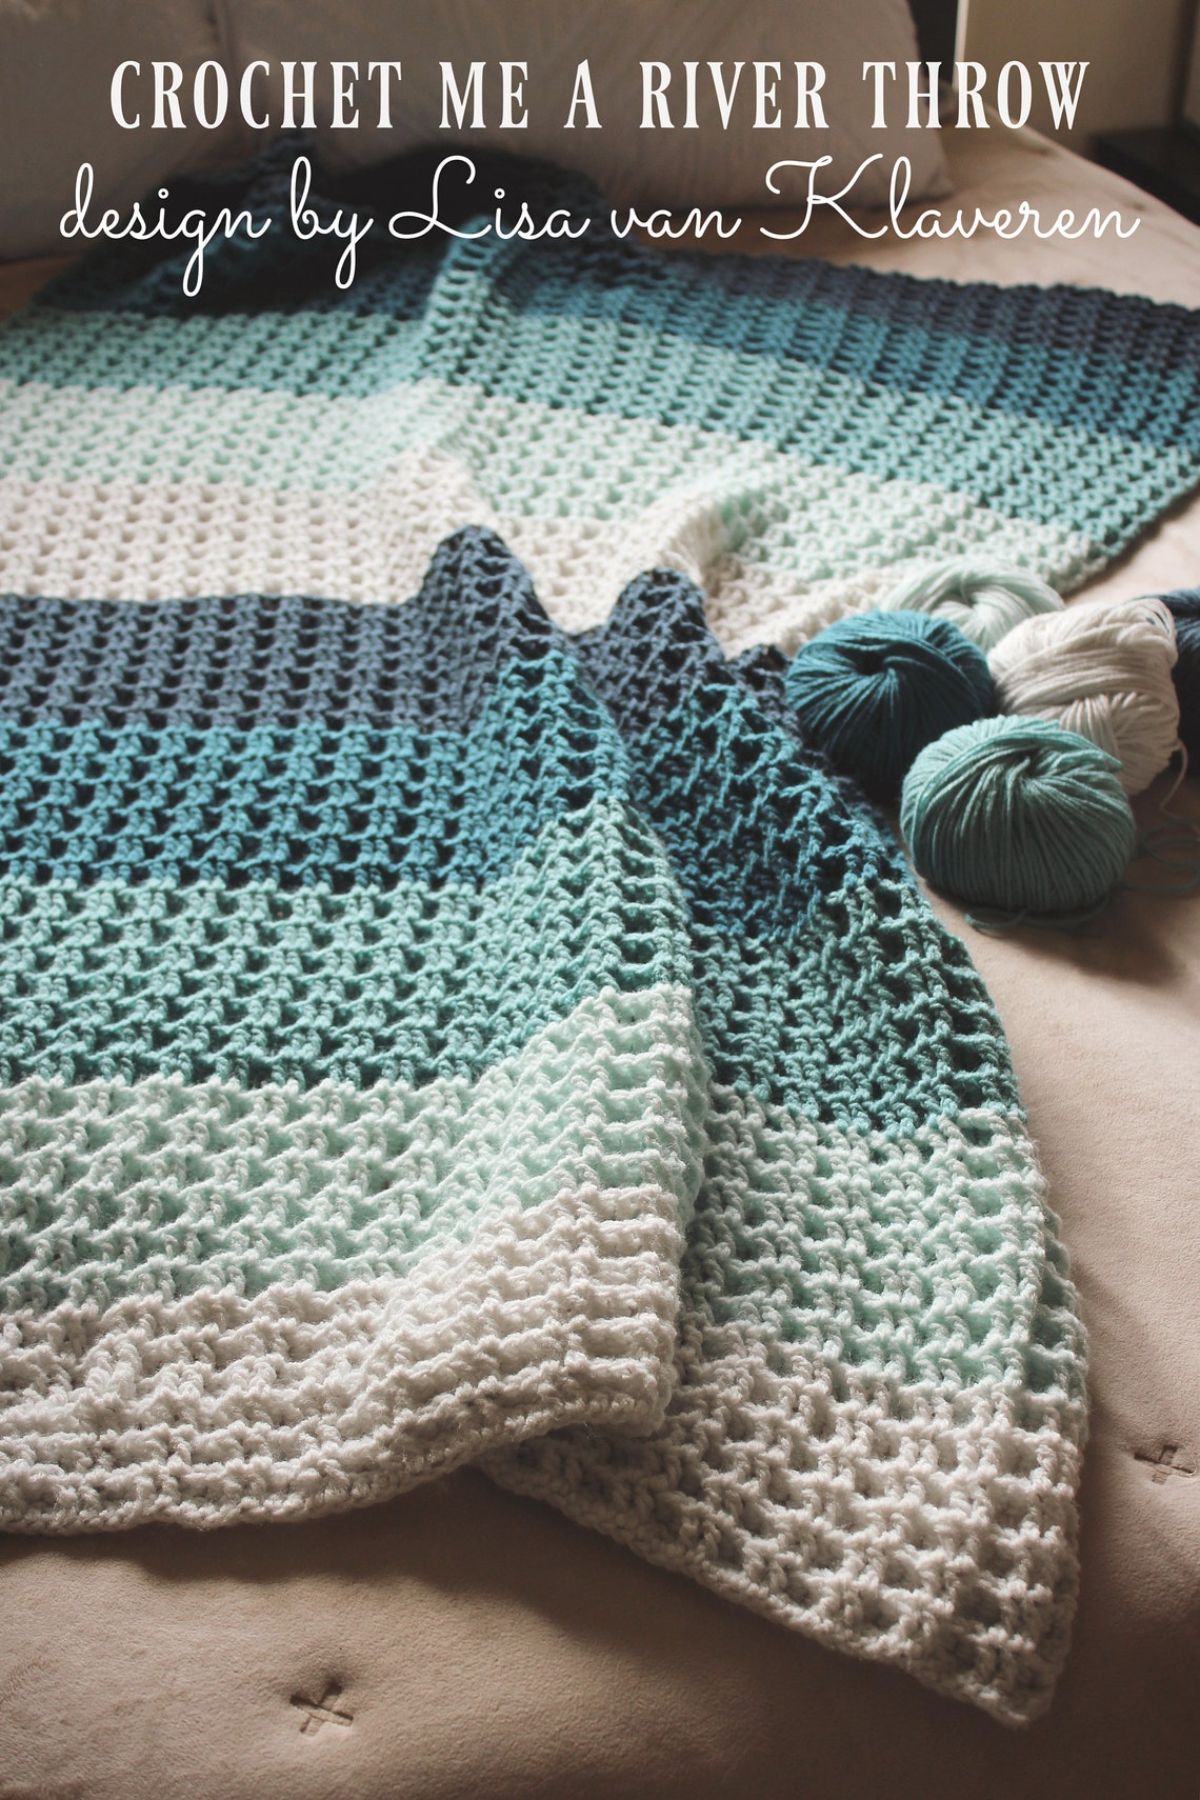  A cream, light blue, blue, and navy blue horizontal striped crochet blanket spread over a sofa next to some yarn balls.